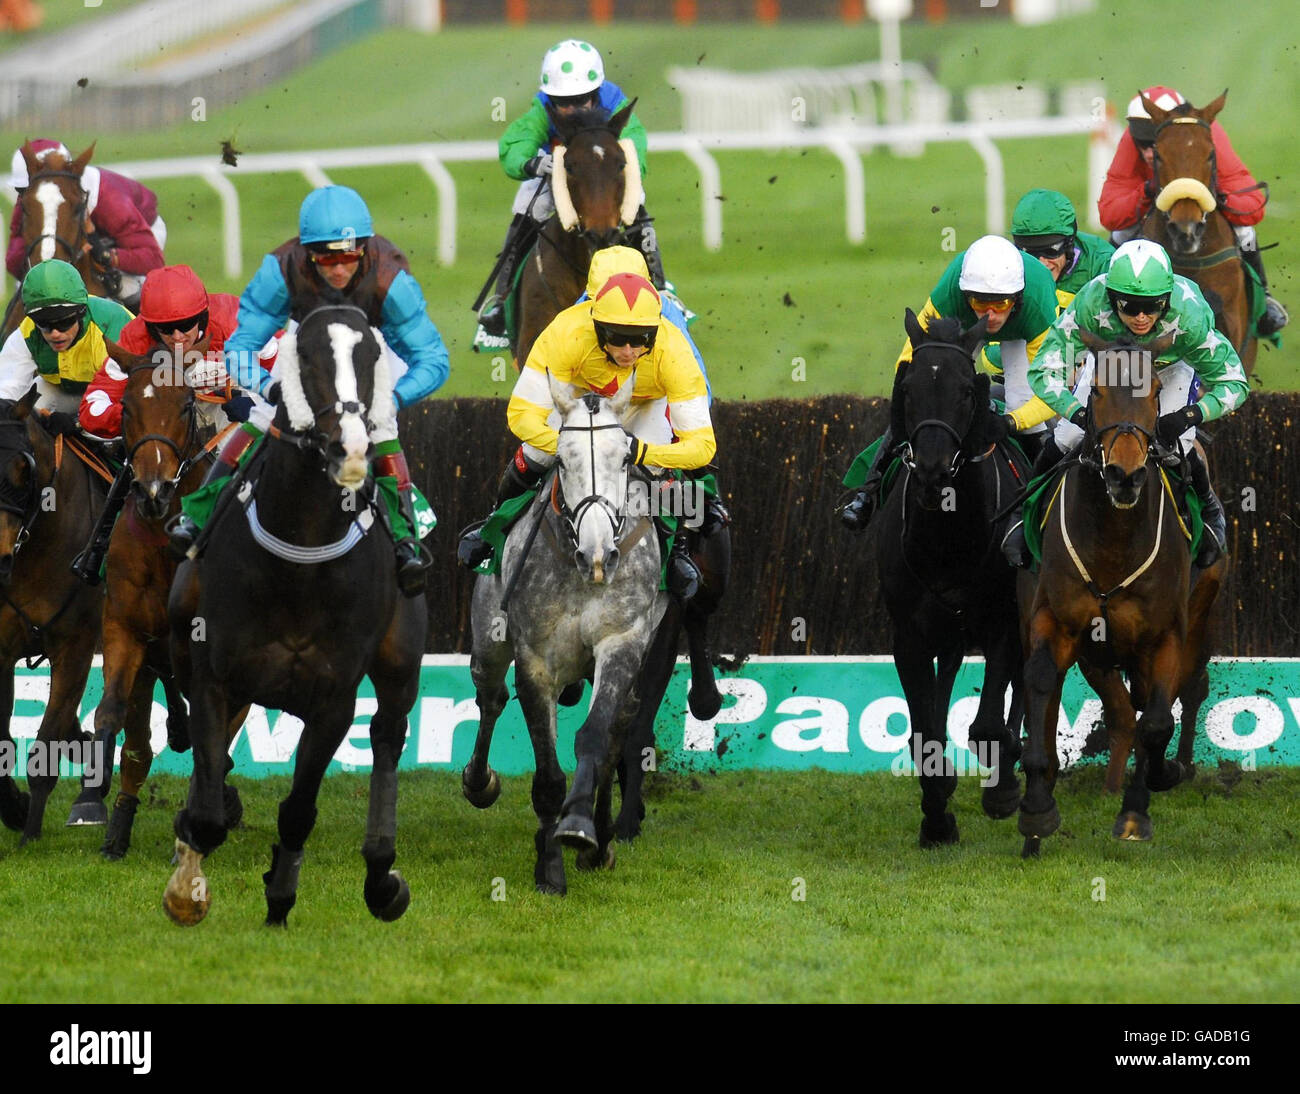 Granit Jack ridden by Liam Heard (centre) comes away from the fence in front of the grandstand at Cheltenham Racecourse. Stock Photo